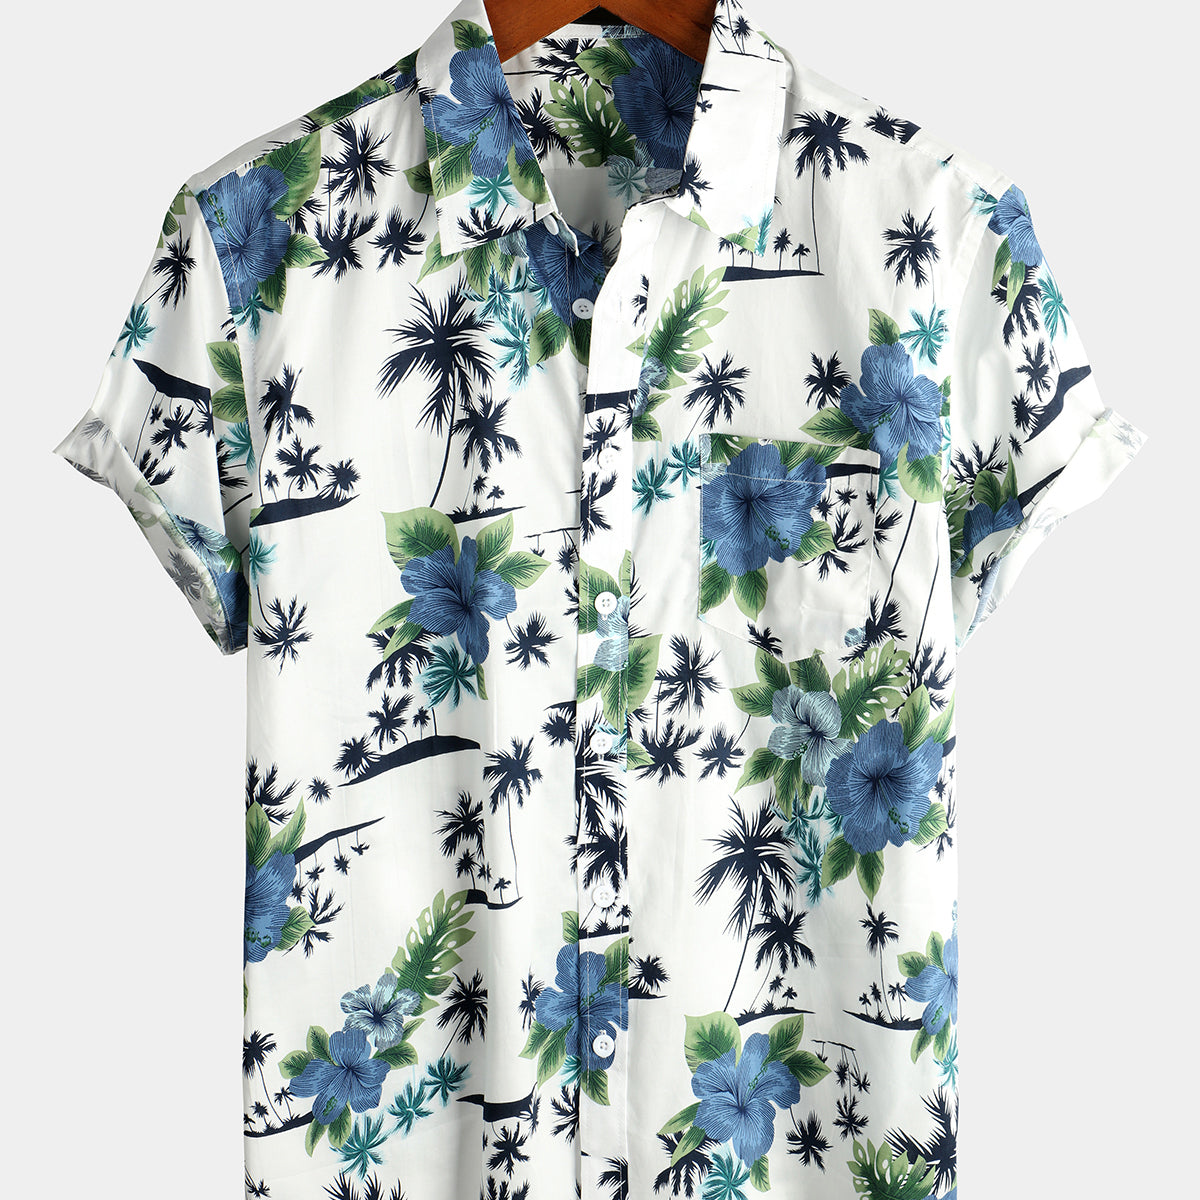 Men's Holiday Floral Short Sleeve Cotton Shirt